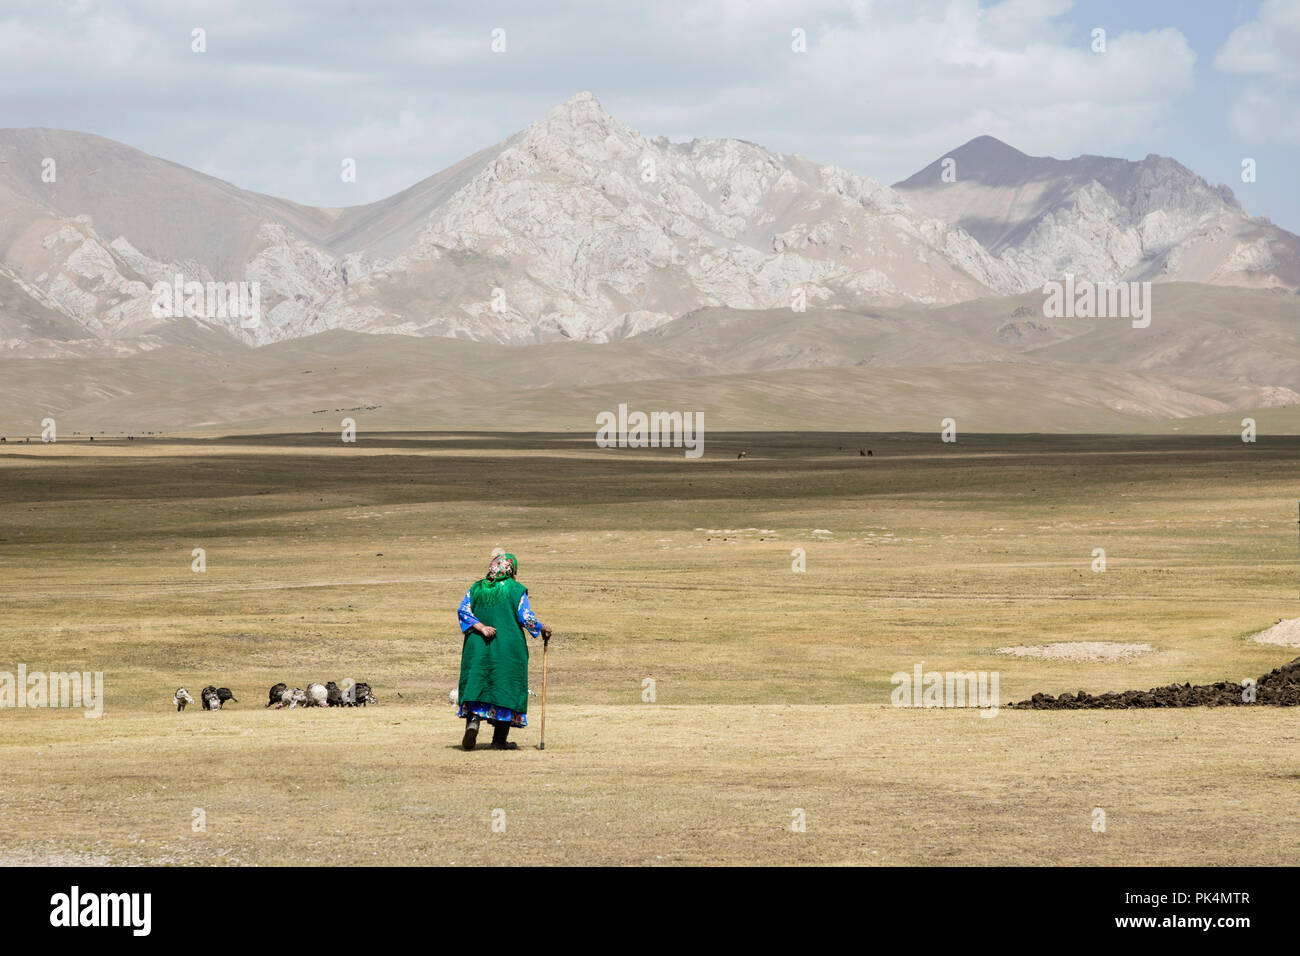 Song Kul, Kyrgyzstan, August 8 2018: An old Kyrgyz woman walks leisurely in the steppe at Song Kul lake in Kyrgyzstan Stock Photo